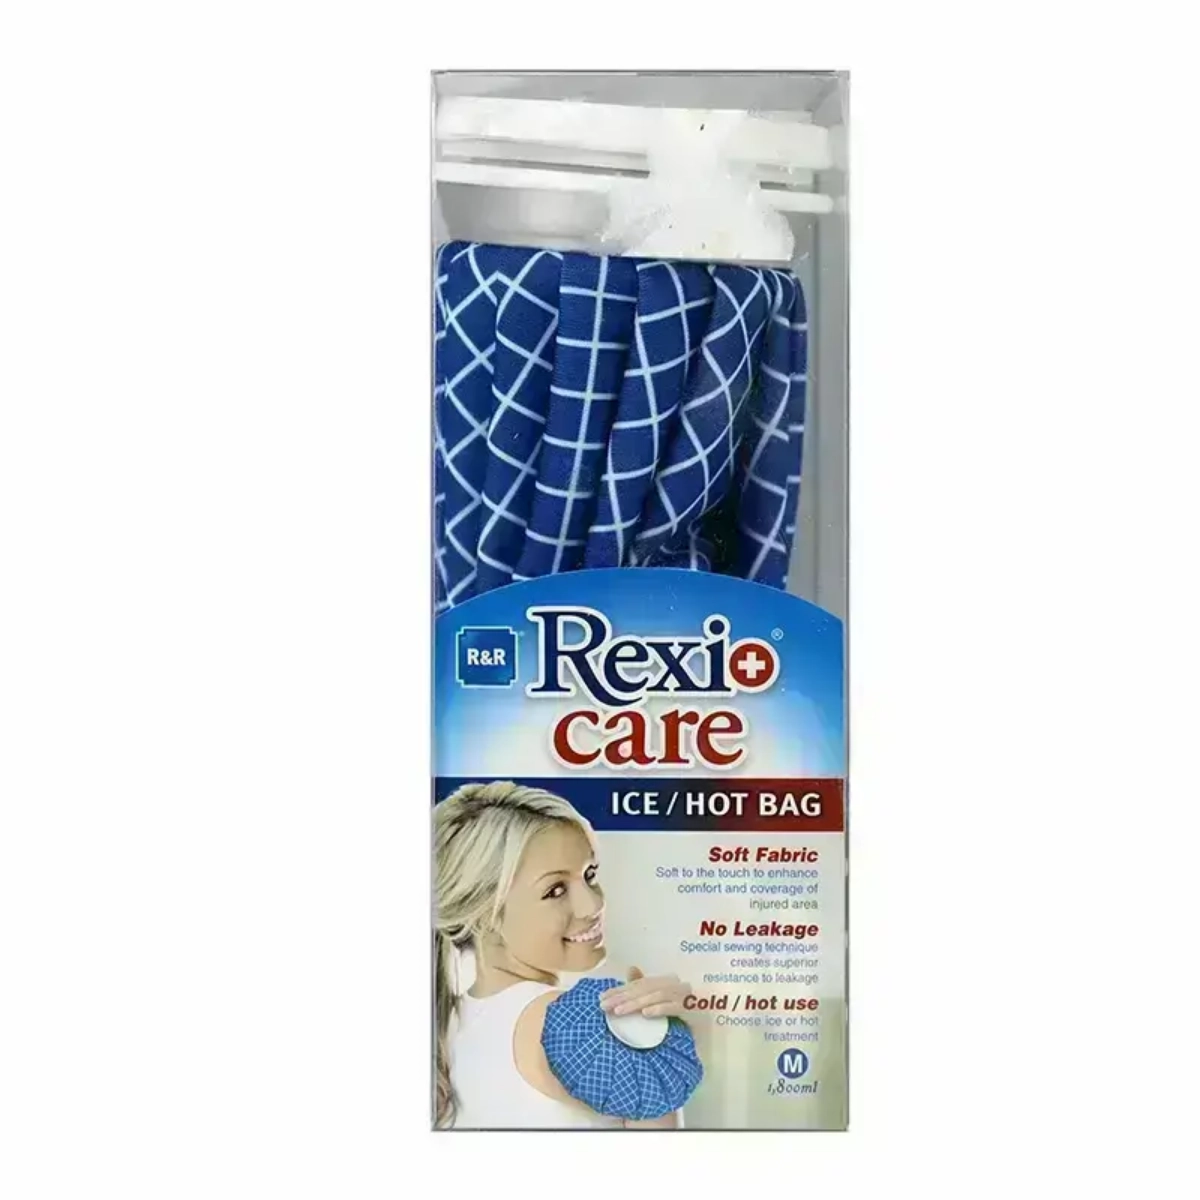 Hot cold compress Rexio+care ice/hot bag. Made in Taiwan